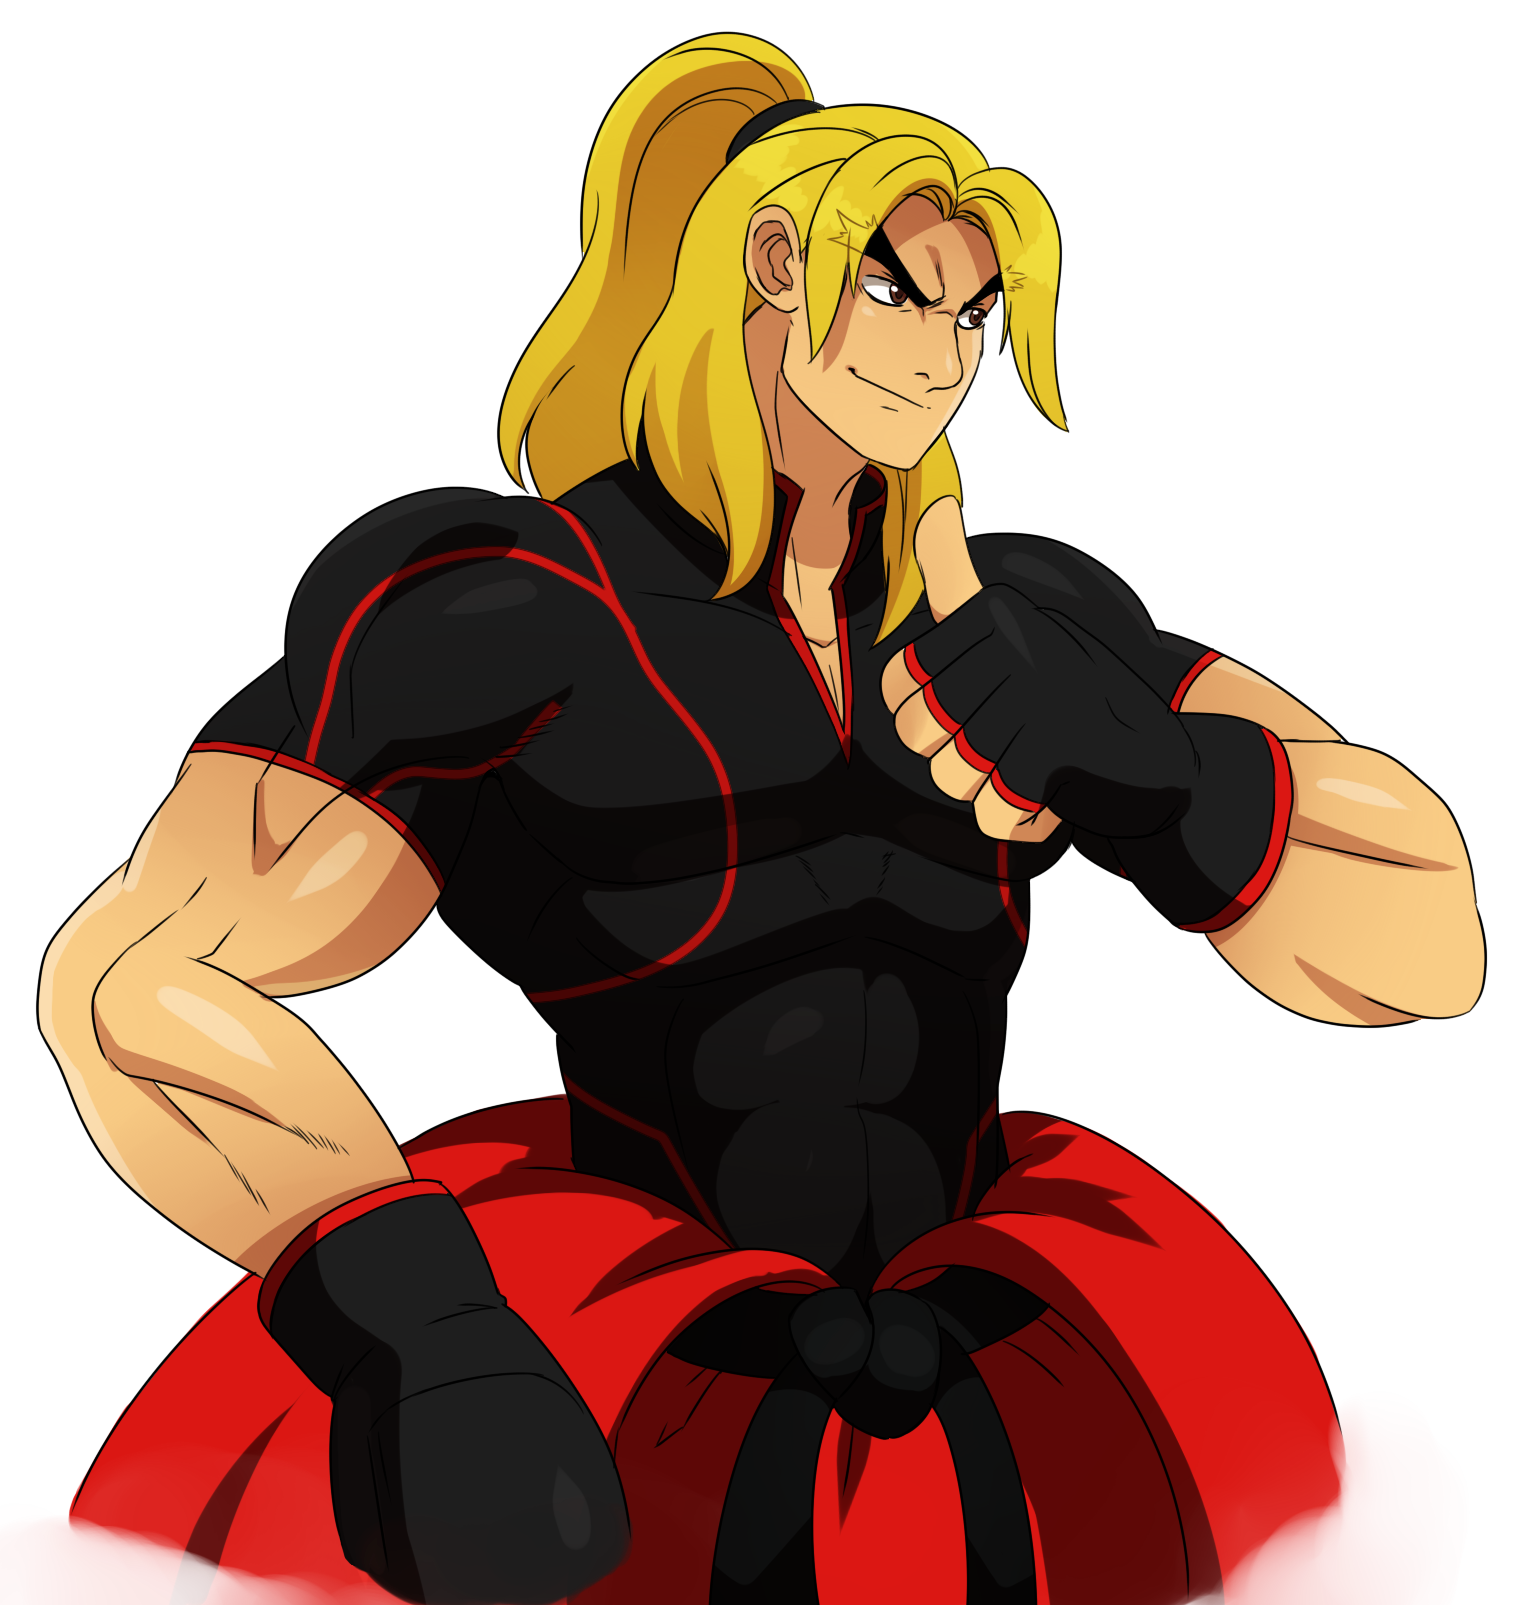 Anime Anime Boys Video Game Characters Video Games Anime Games Street Fighter Ken Masters Short Hair 1525x1605